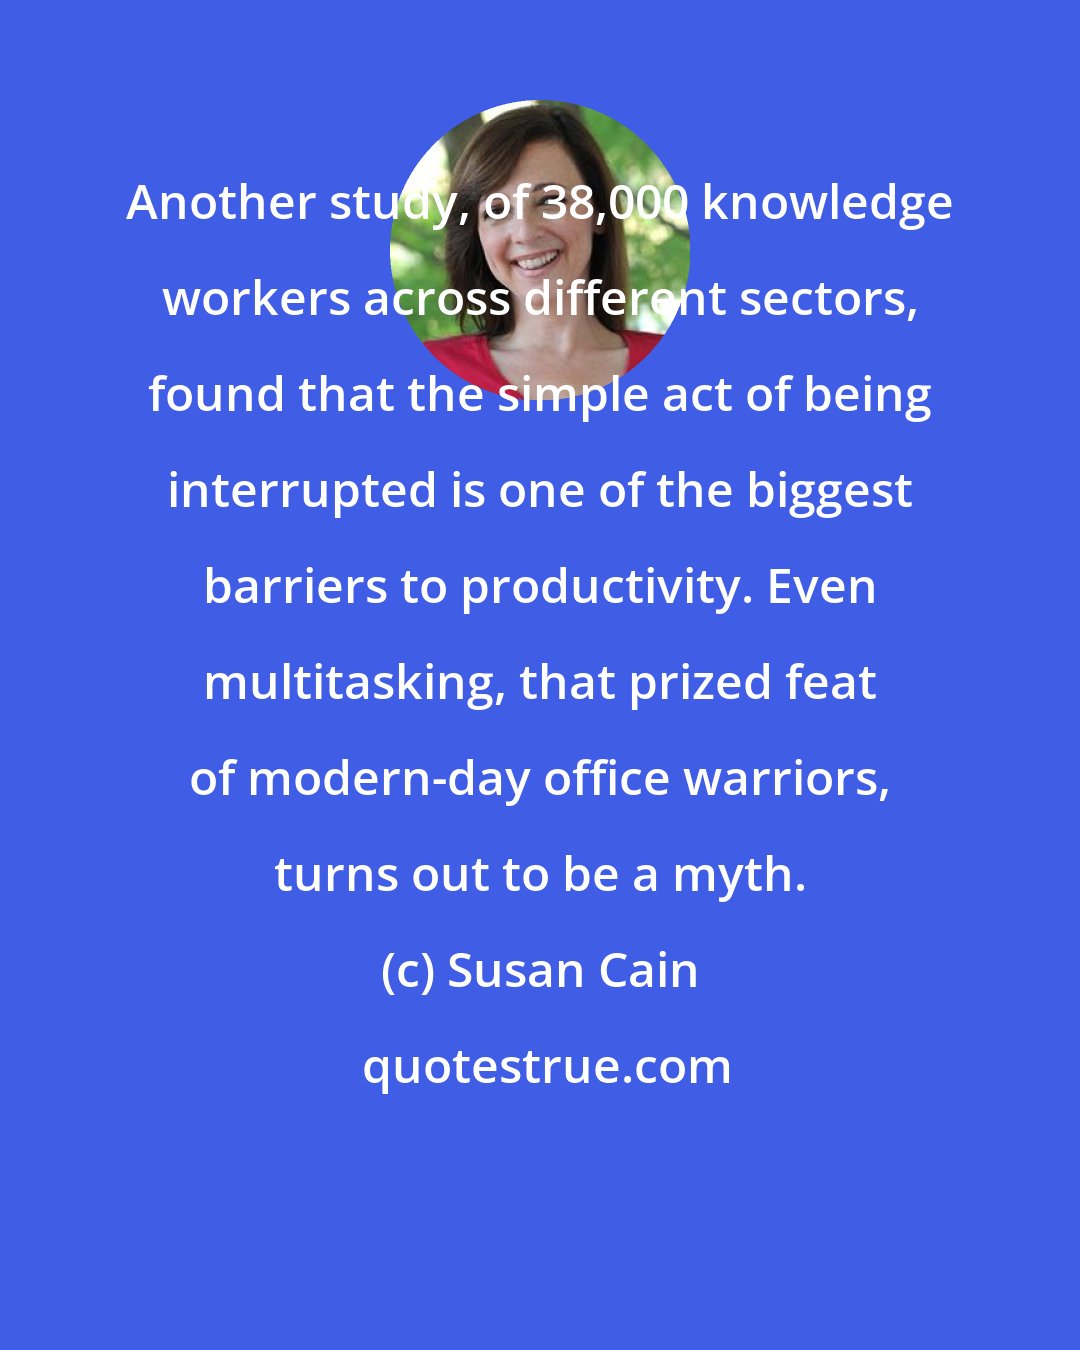 Susan Cain: Another study, of 38,000 knowledge workers across different sectors, found that the simple act of being interrupted is one of the biggest barriers to productivity. Even multitasking, that prized feat of modern-day office warriors, turns out to be a myth.